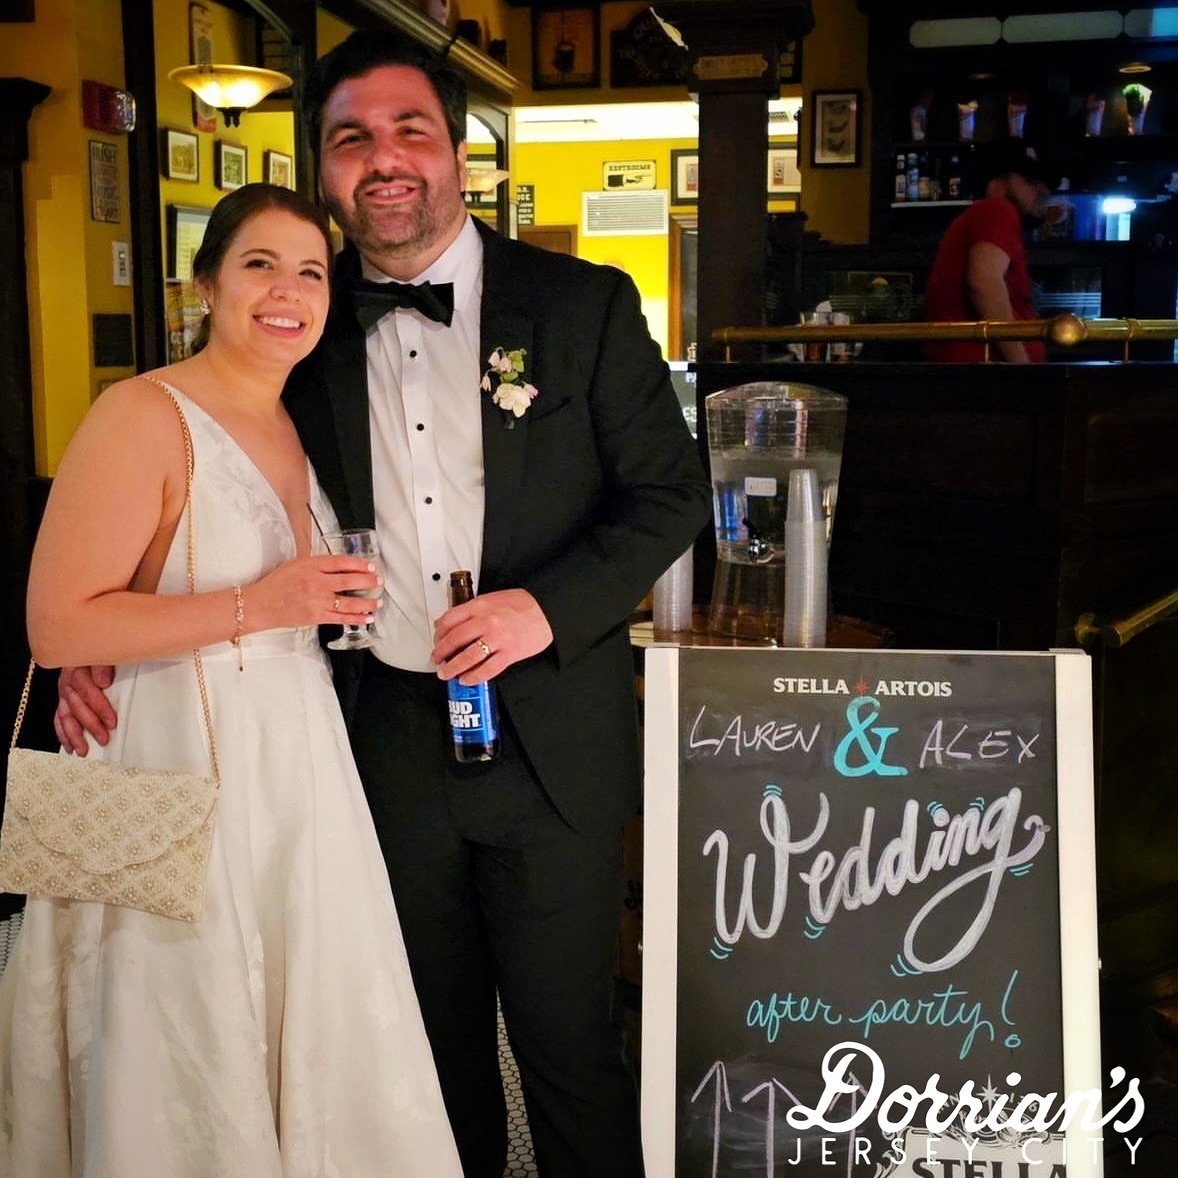 The go-to after party spot in Jersey City. Congrats to the beautiful couple Lauren and Alex. Thank you for letting Dorrian&rsquo;s be part of your special day. 
@lbsommer 
@apastore86